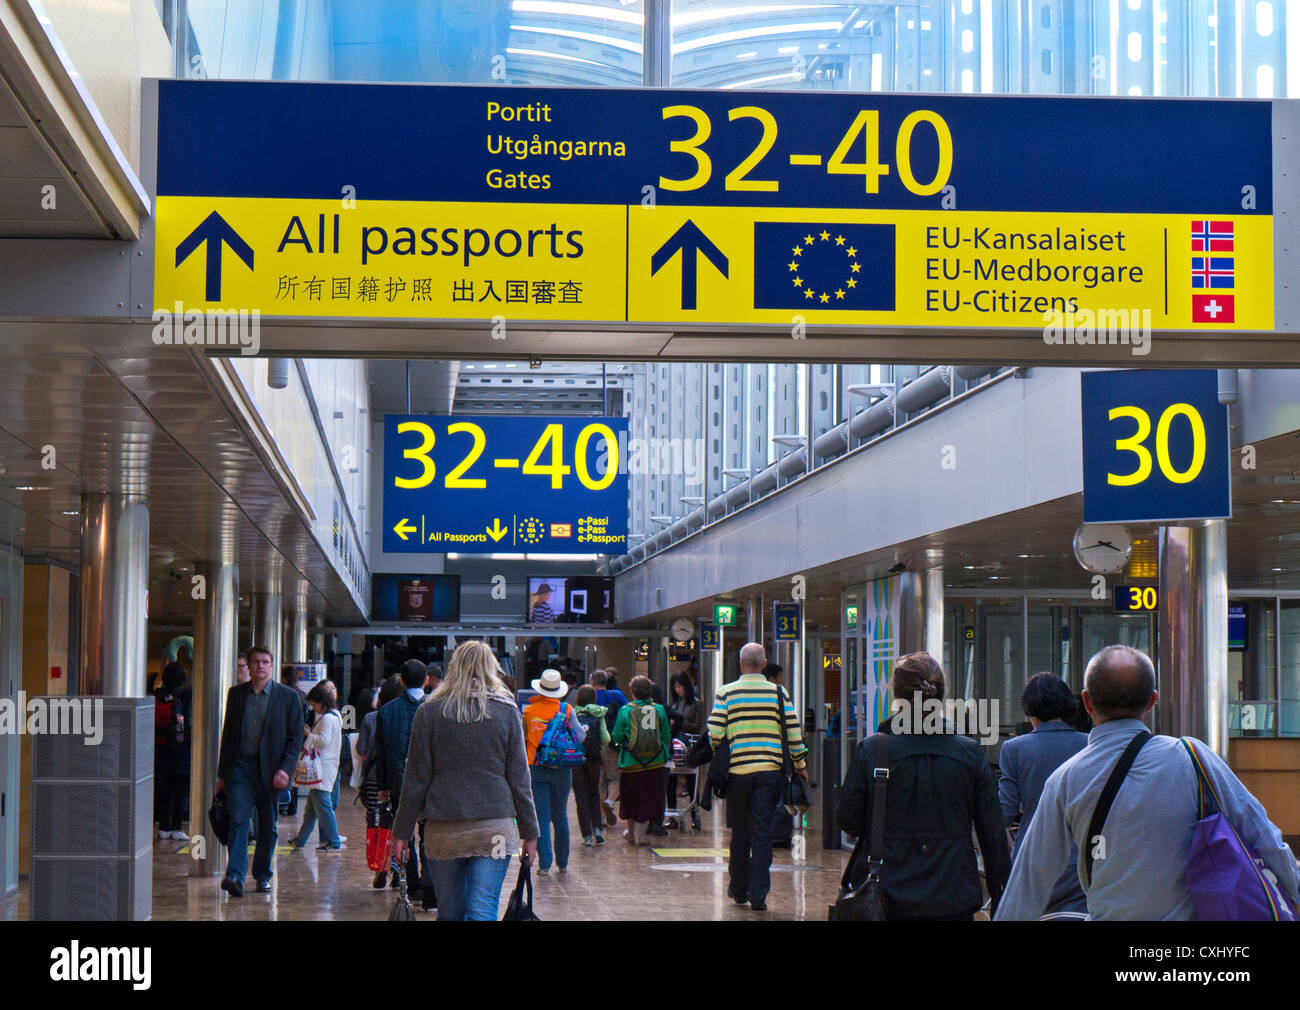 Airport Passengers HELSINKI  EU signs airside on concourse to border control and departure boarding gates at Vantaa Helsinki airport Finland Stock Photo